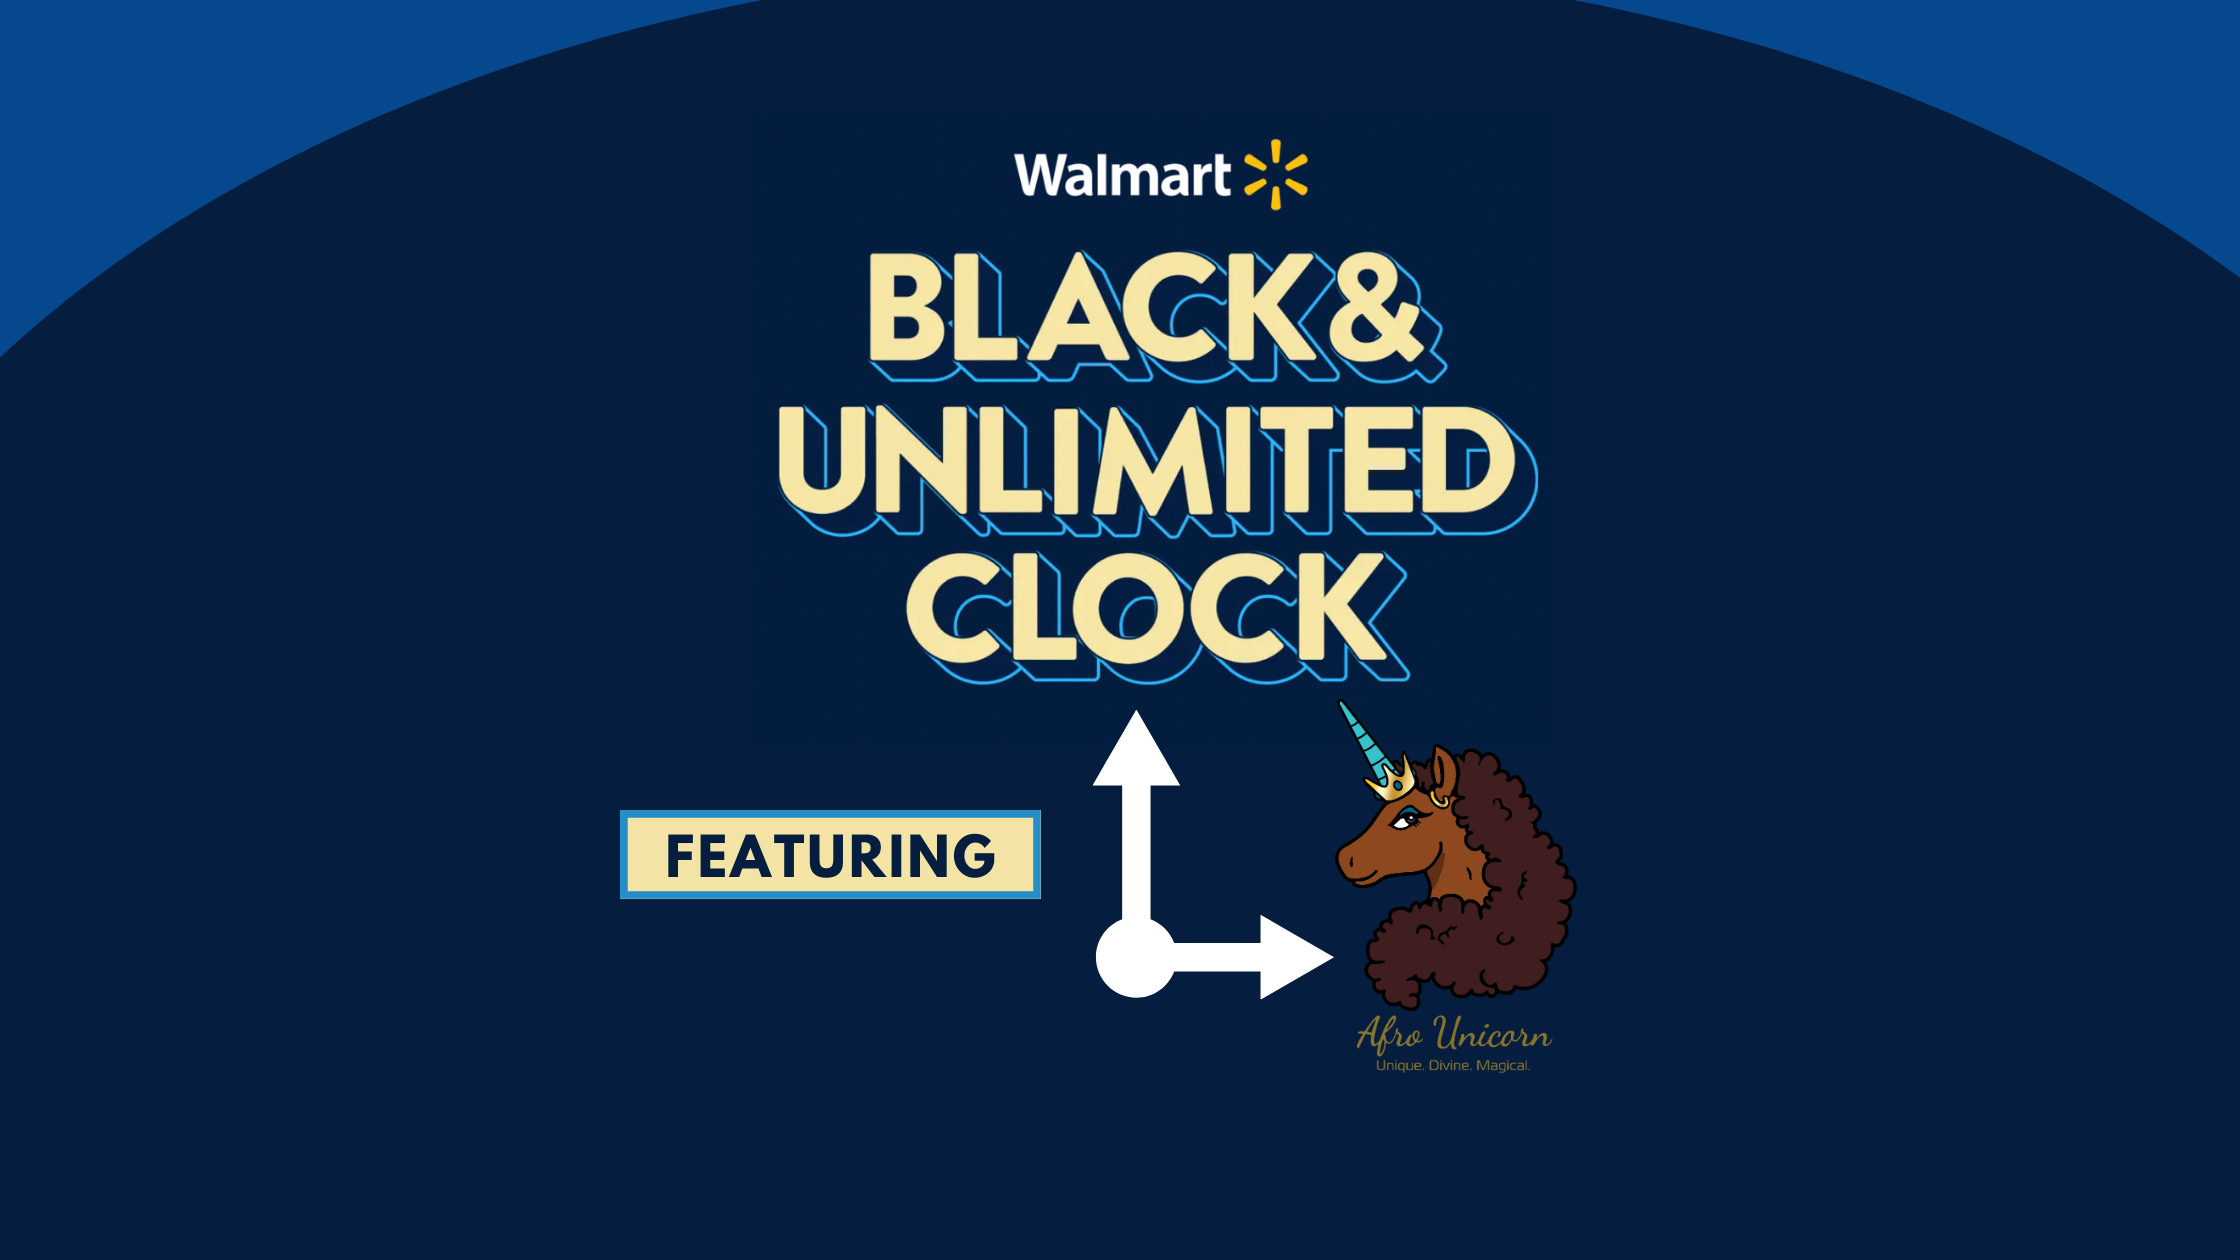 Join Afro Unicorn at Walmart's Black & Unlimited Clock!